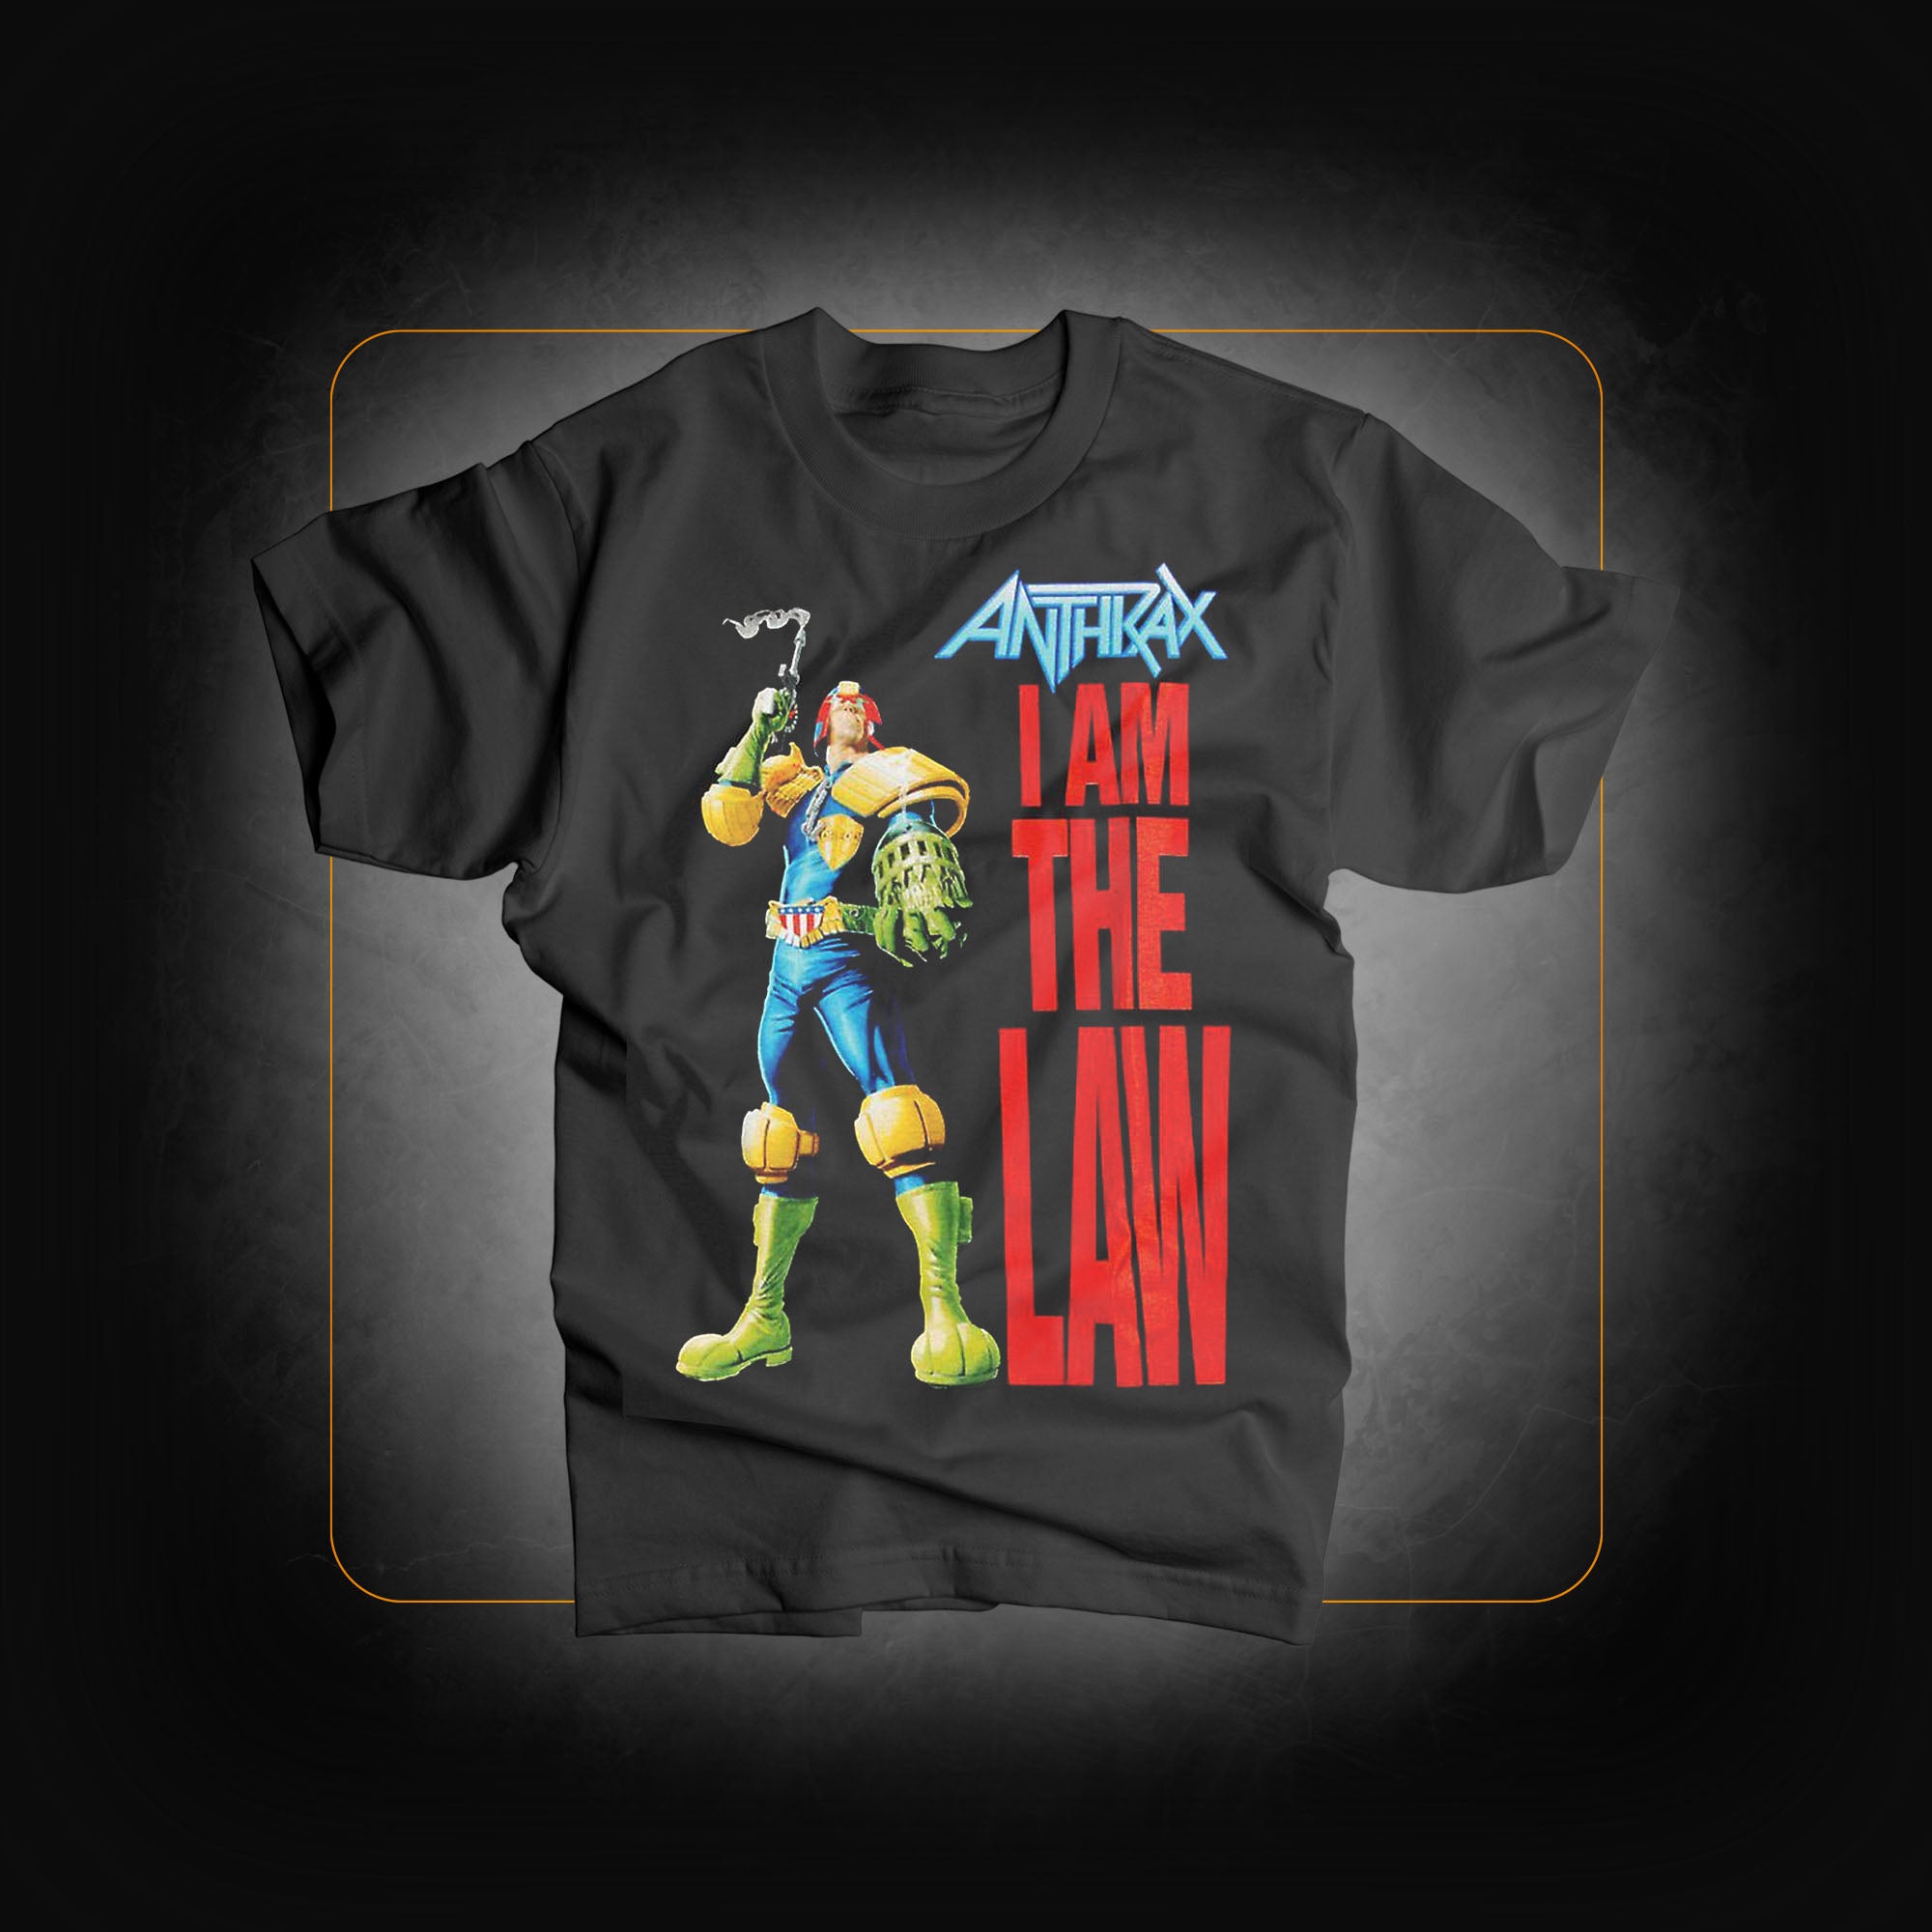 I am the law t-shirt - Anthrax